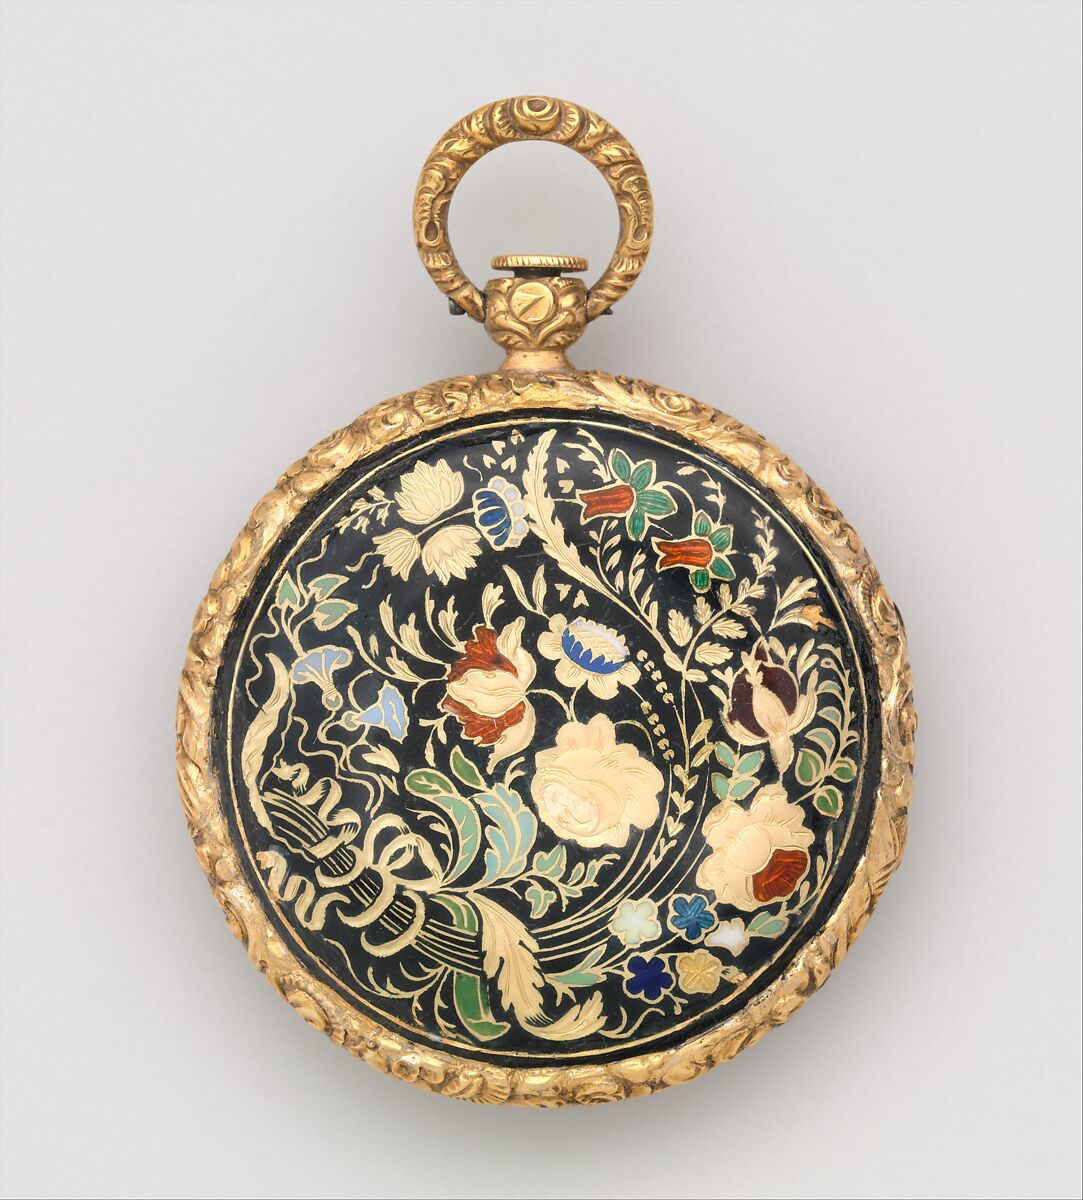 Watch, Case of gold and enamel, with floral design; jeweled movement, with cylinder escapement, French, Lyon 